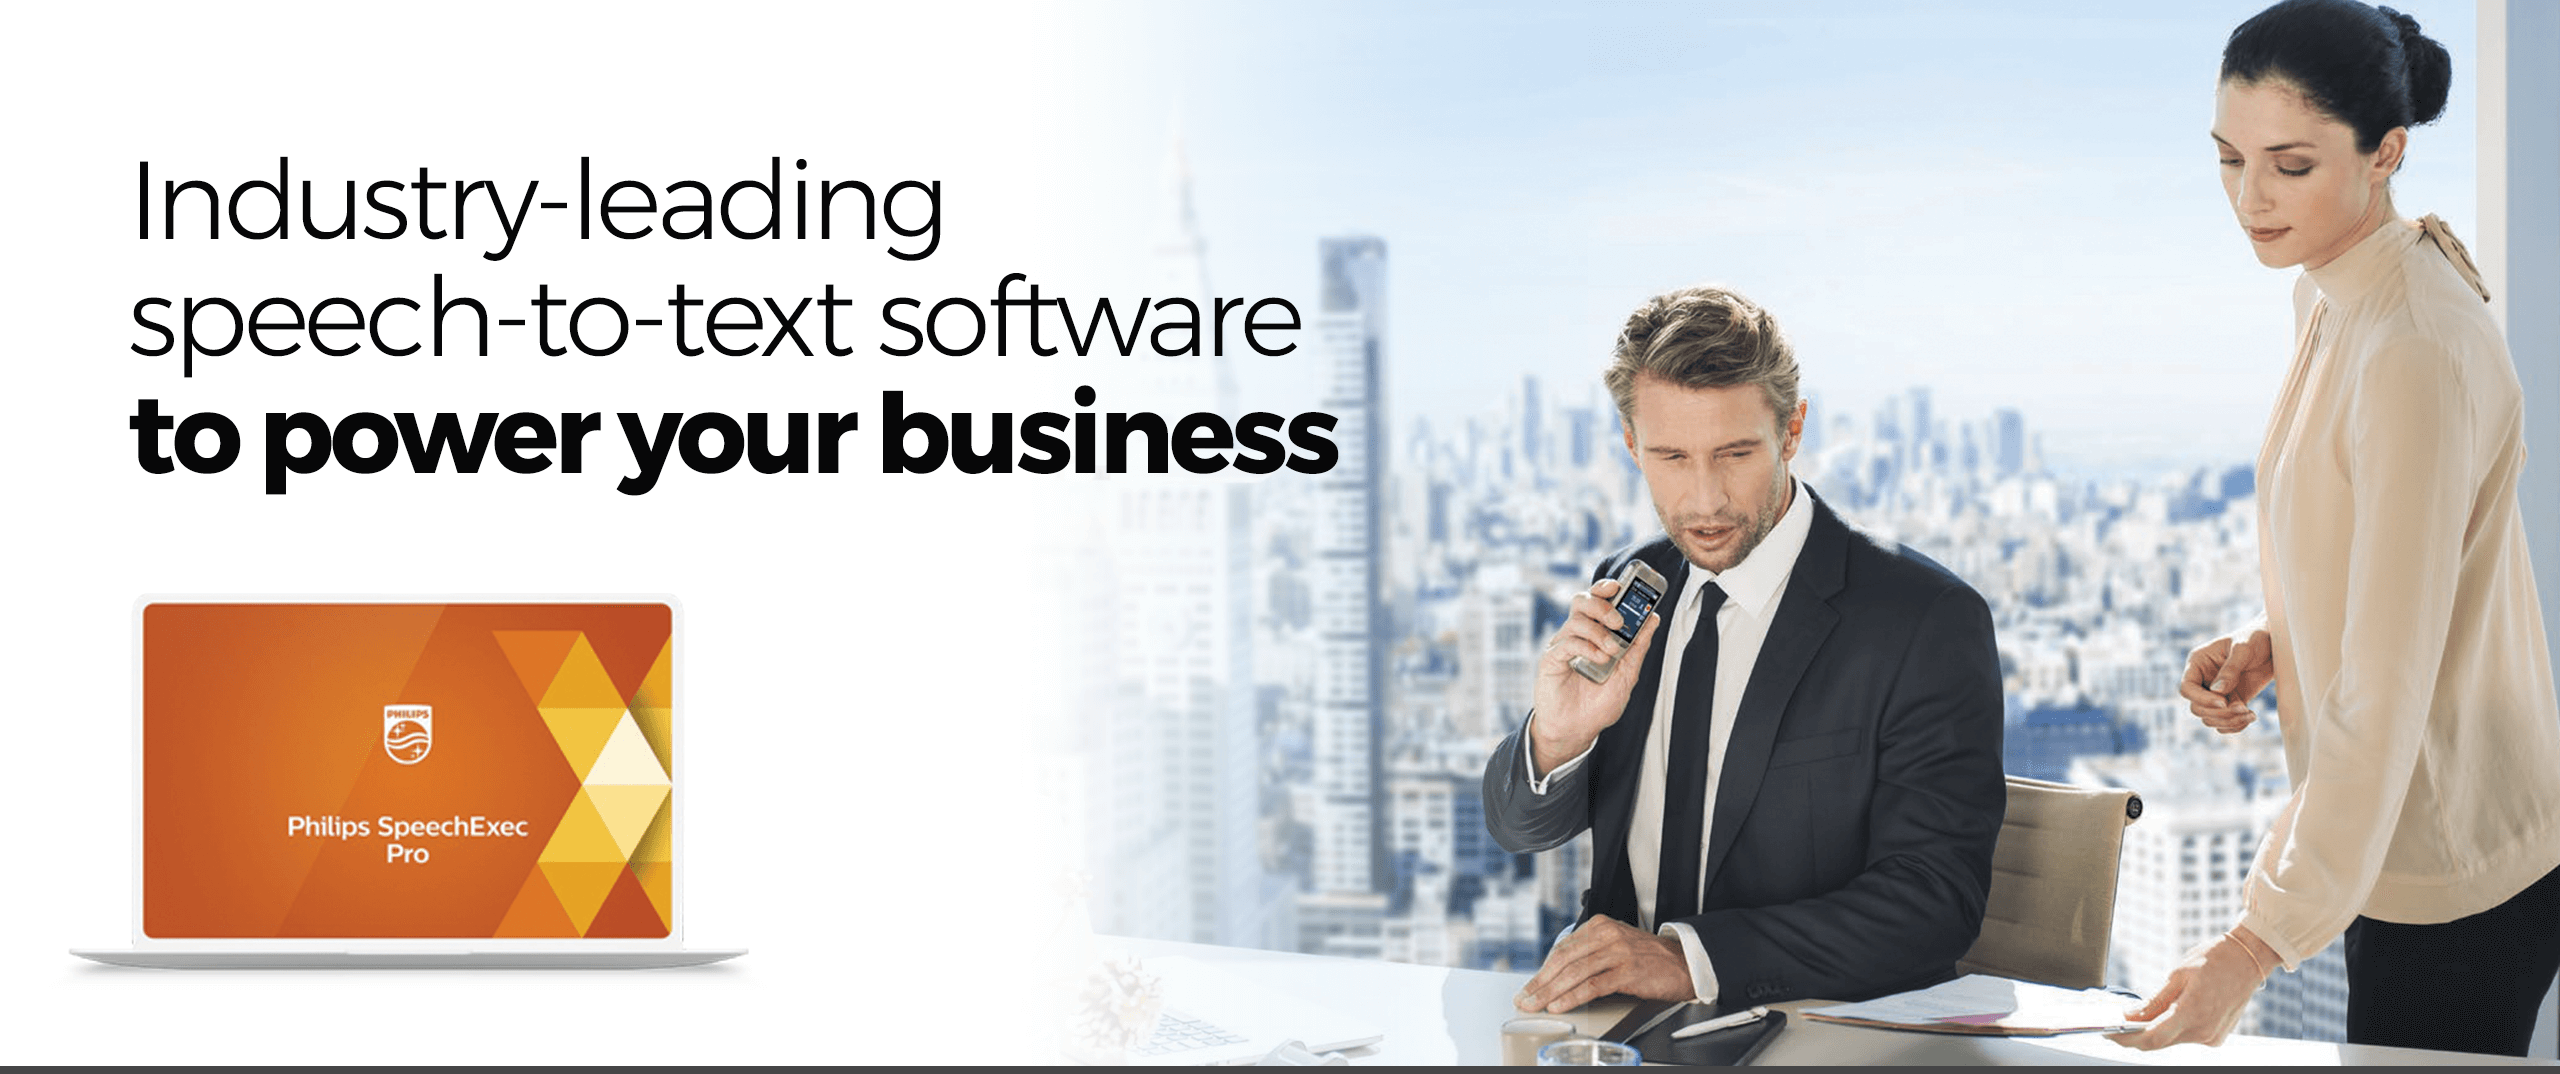 Industry-leading speech-to-text software to power your business - Philips SpeechExec Pro